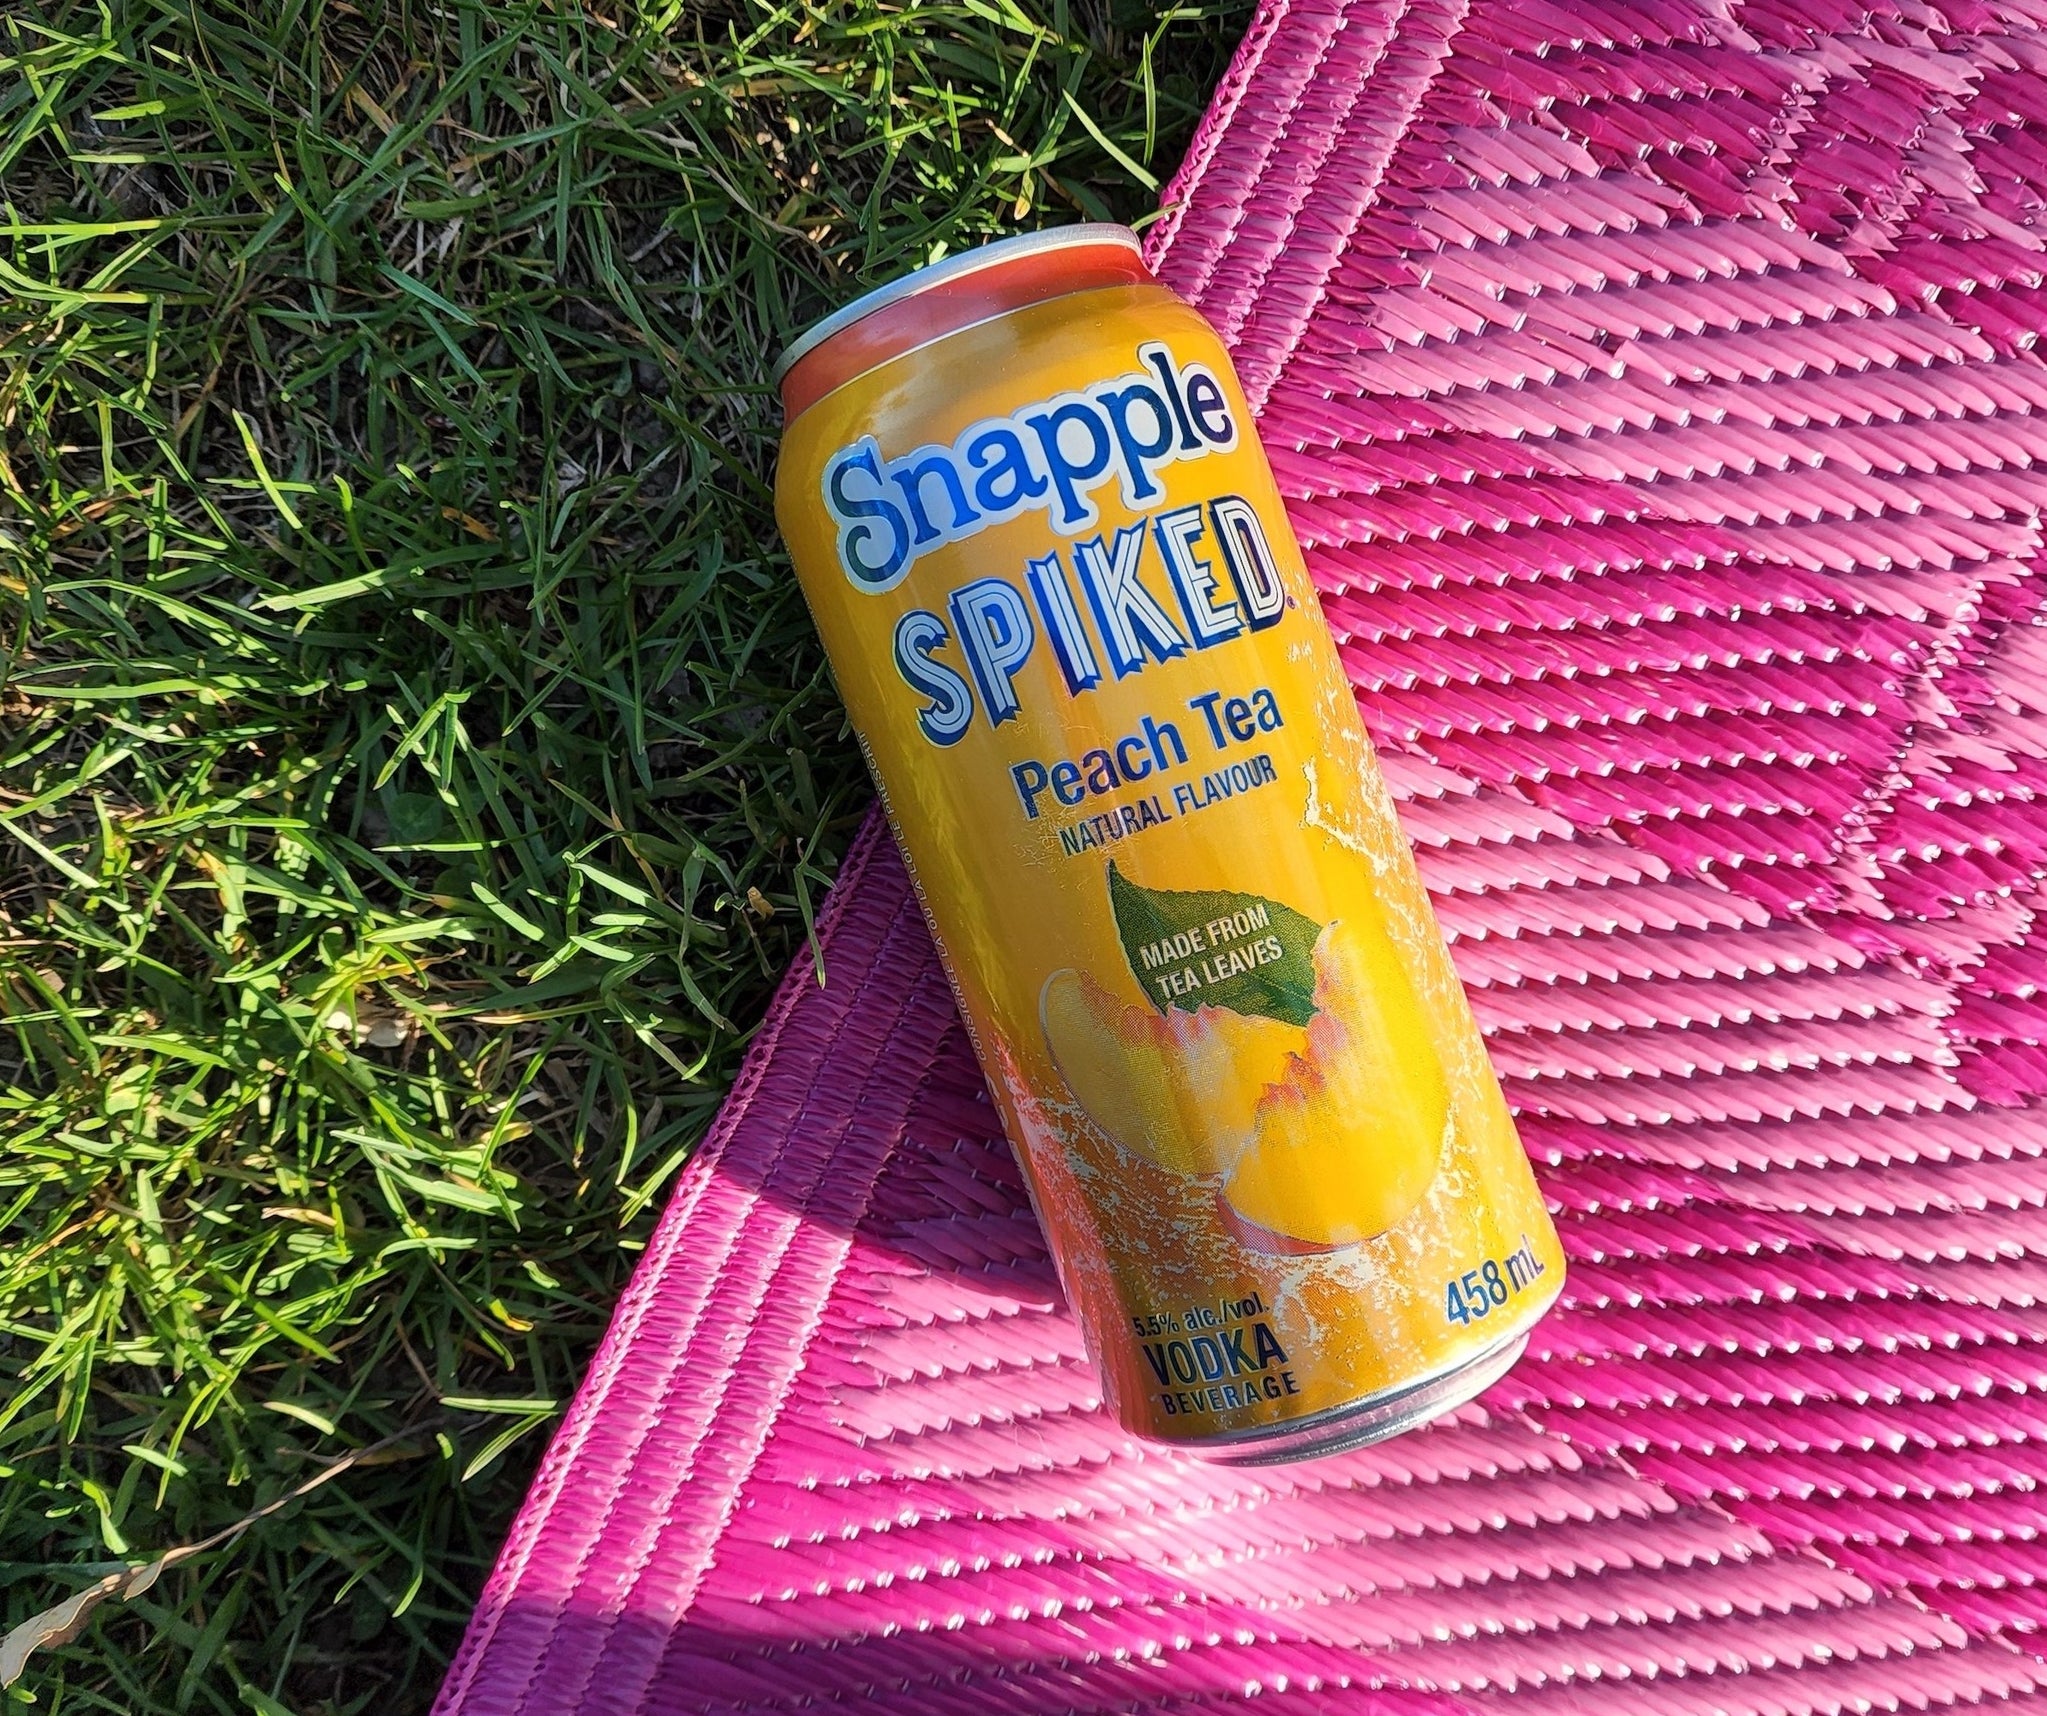 Snapple Spiked Peach Tea Vodka in a can